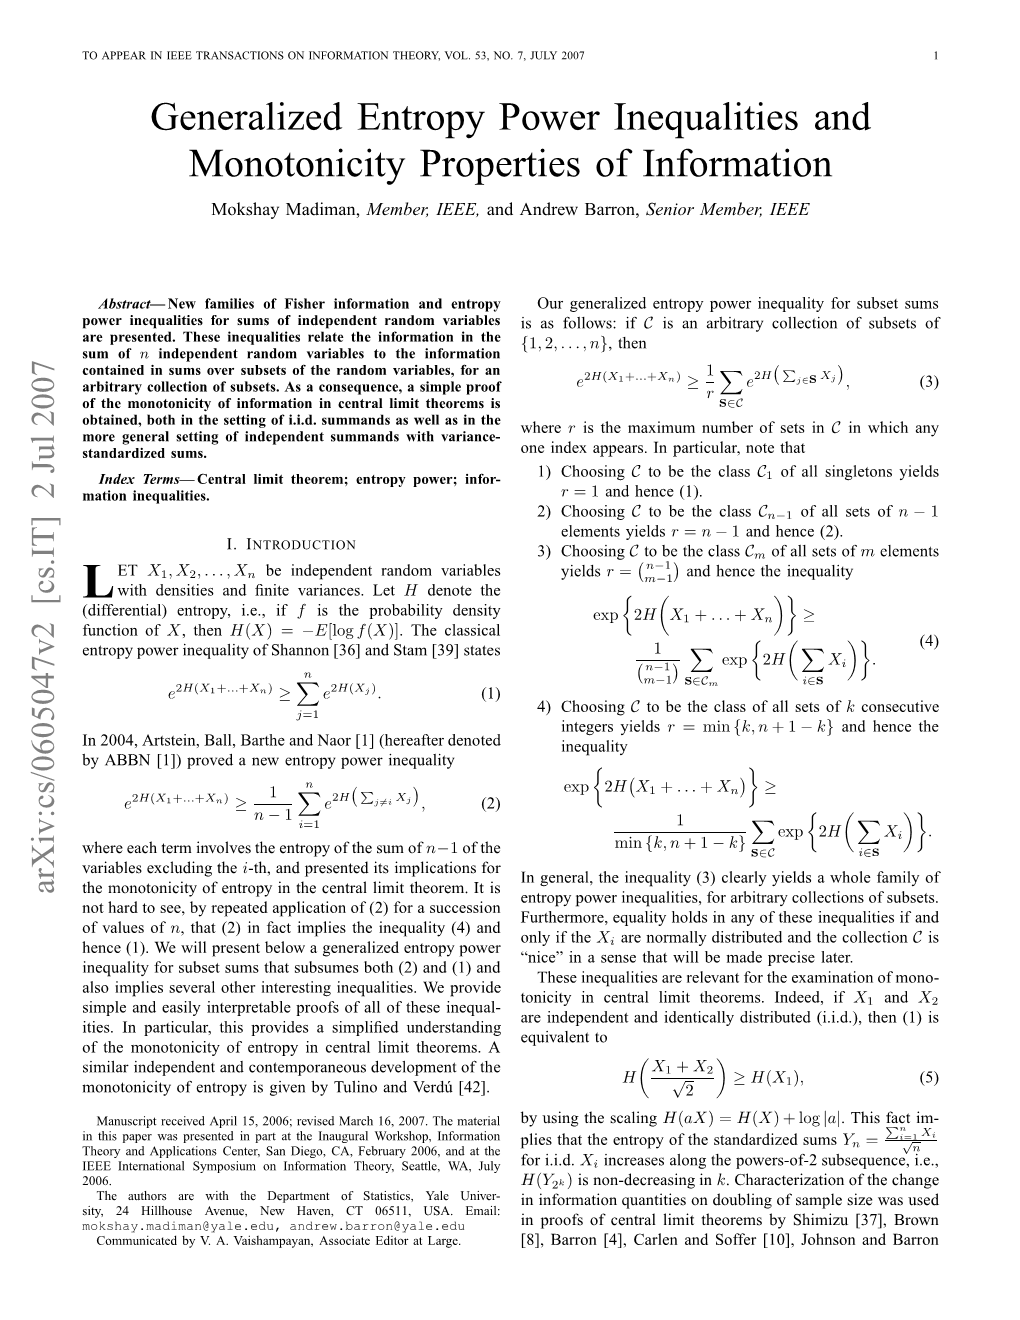 Generalized Entropy Power Inequalities and Monotonicity Properties of Information